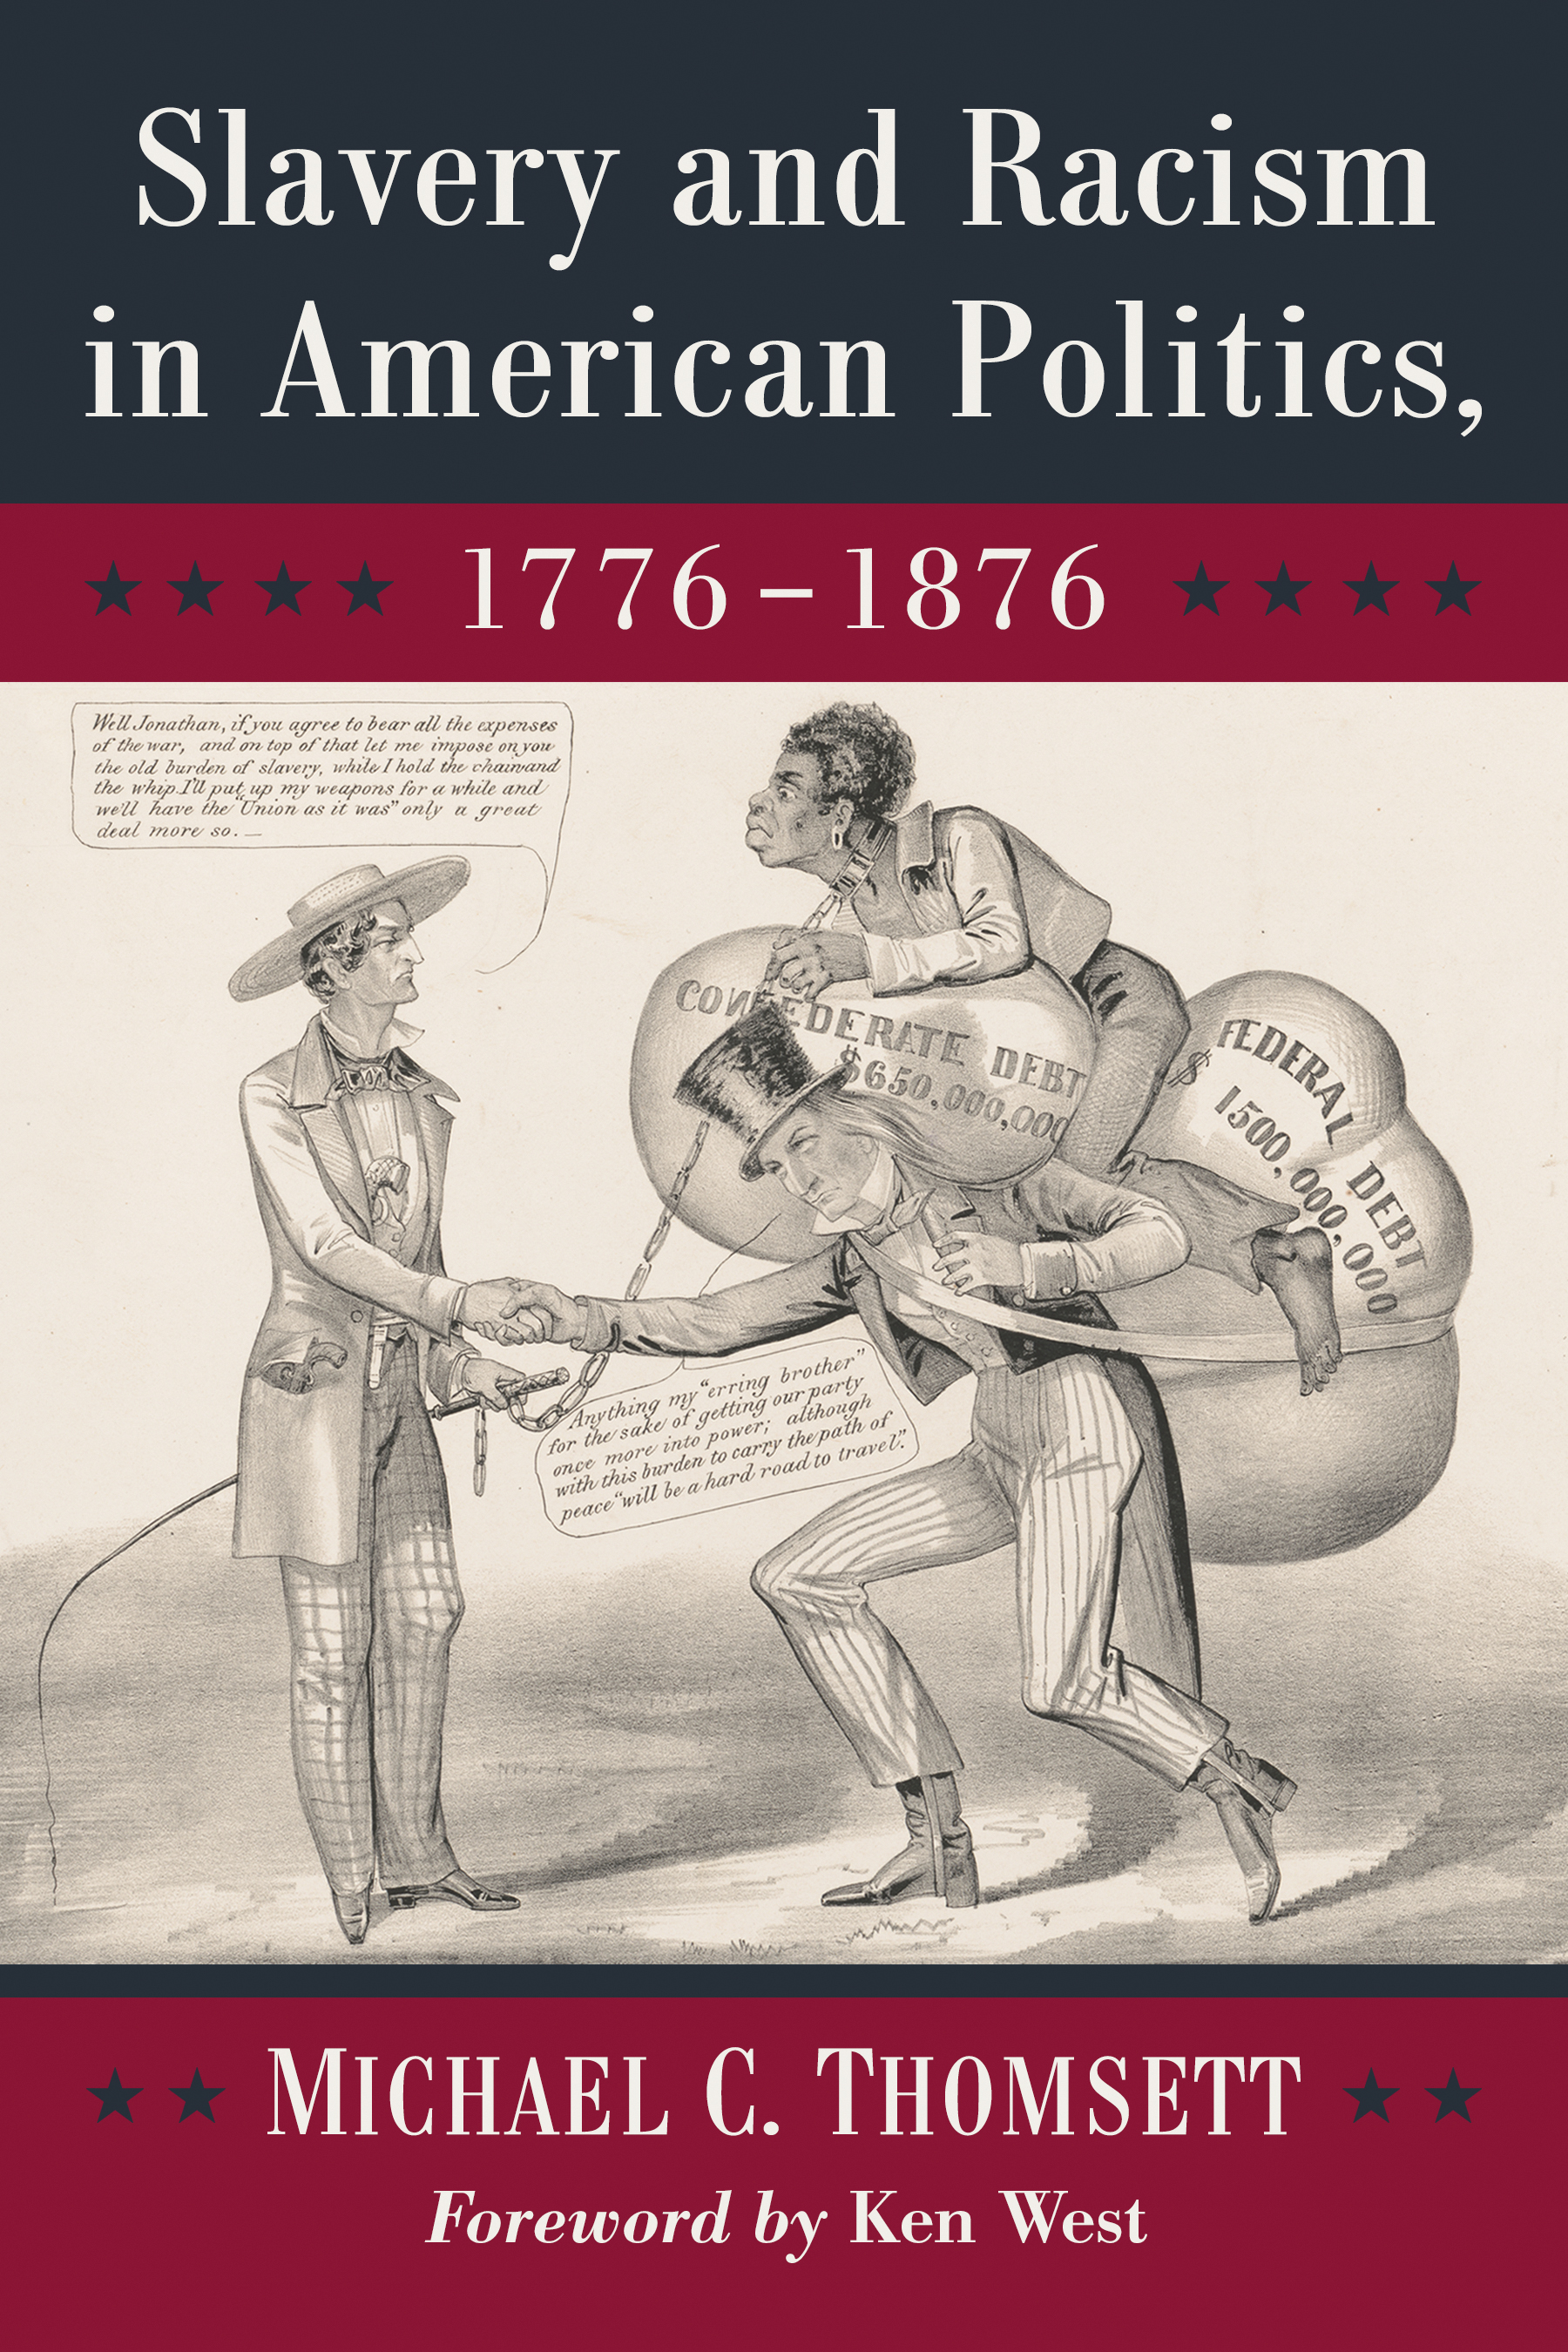 Slavery and Racism in American Politics, 1776-1876 - 15-24.99